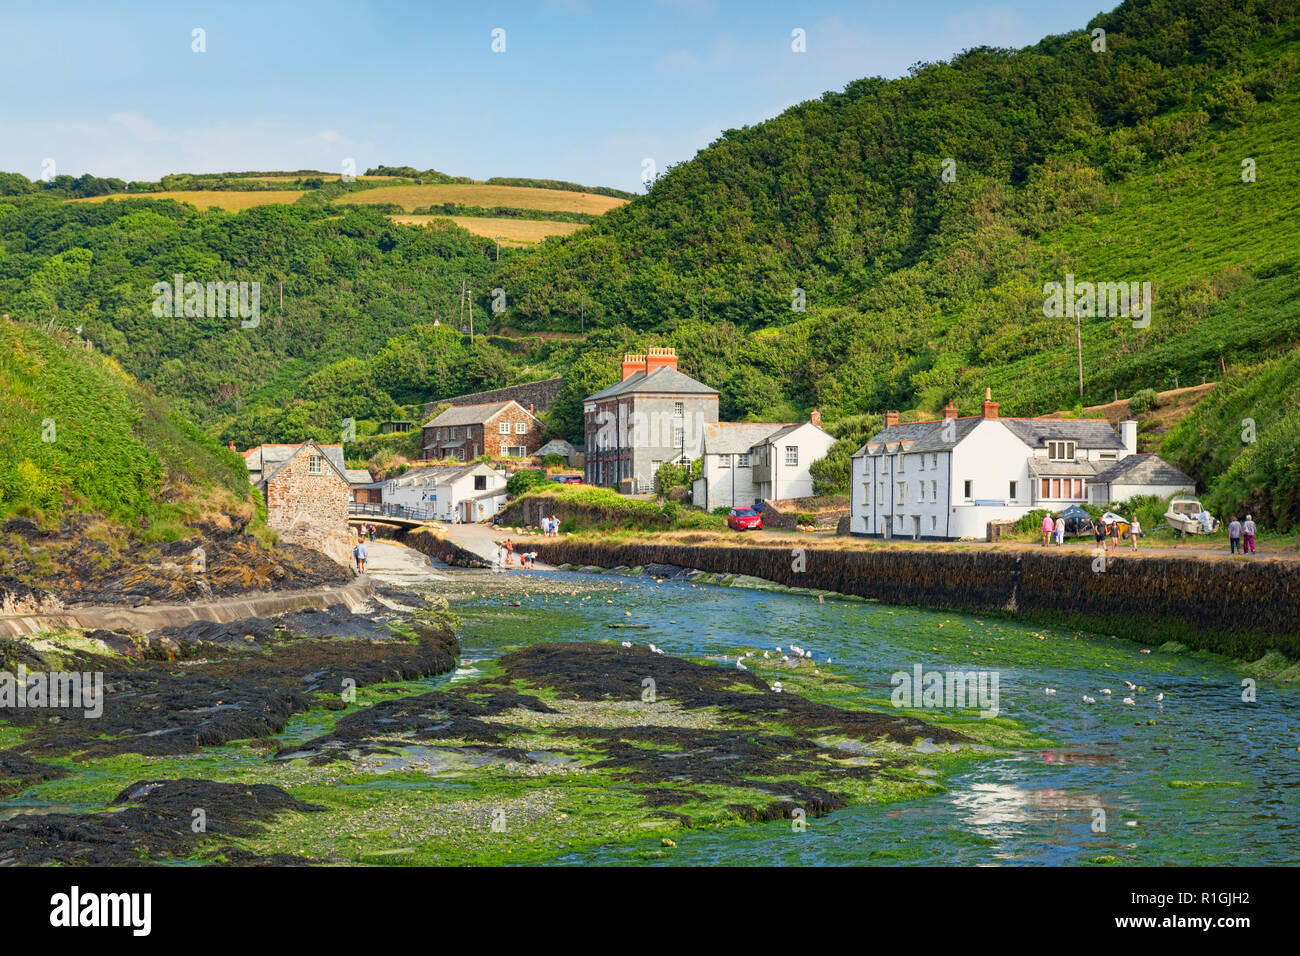 2 July 2018: Boscastle, Cornwall, UK - Visitors stroll around the village in its wooded valley, with the River Valency at low tide. Stock Photo